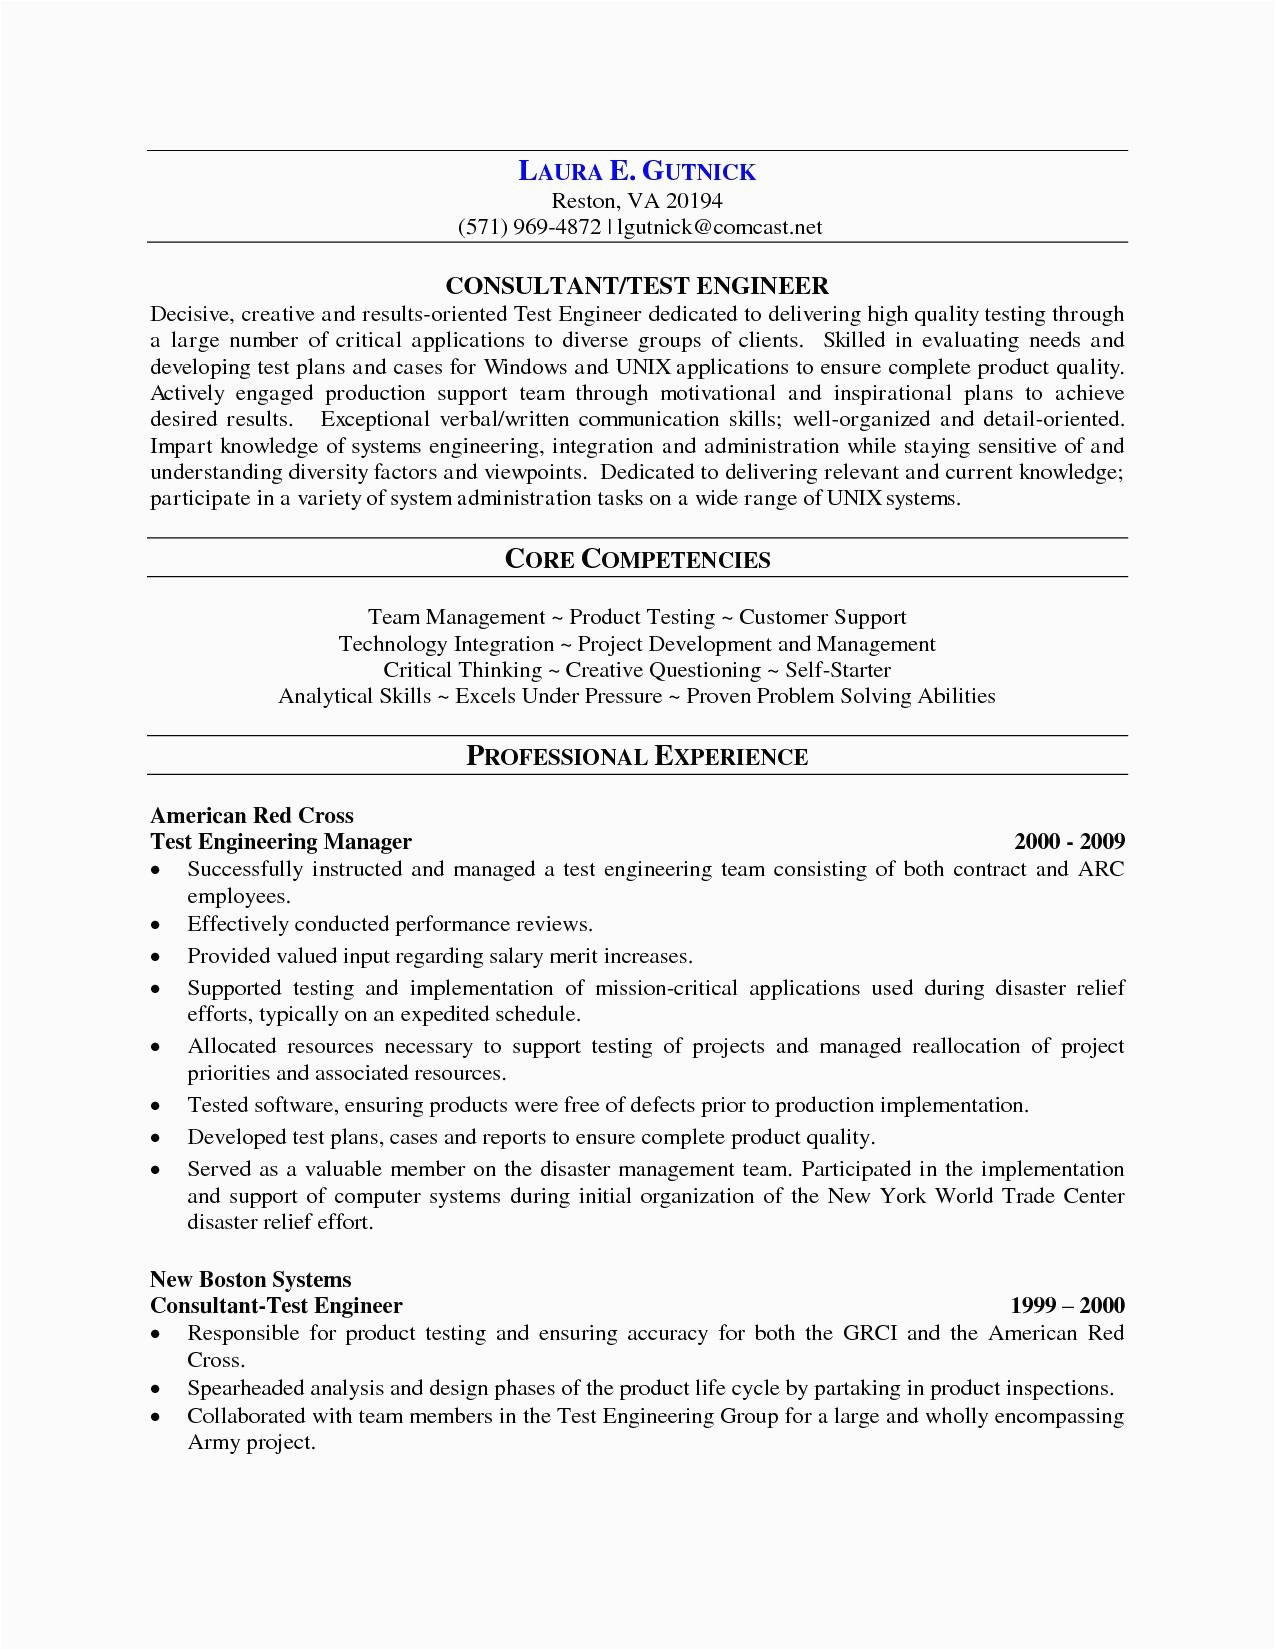 Sample Resume for 2 Years Experience software Developer Sample Resume for software Tester 2 Years Experience